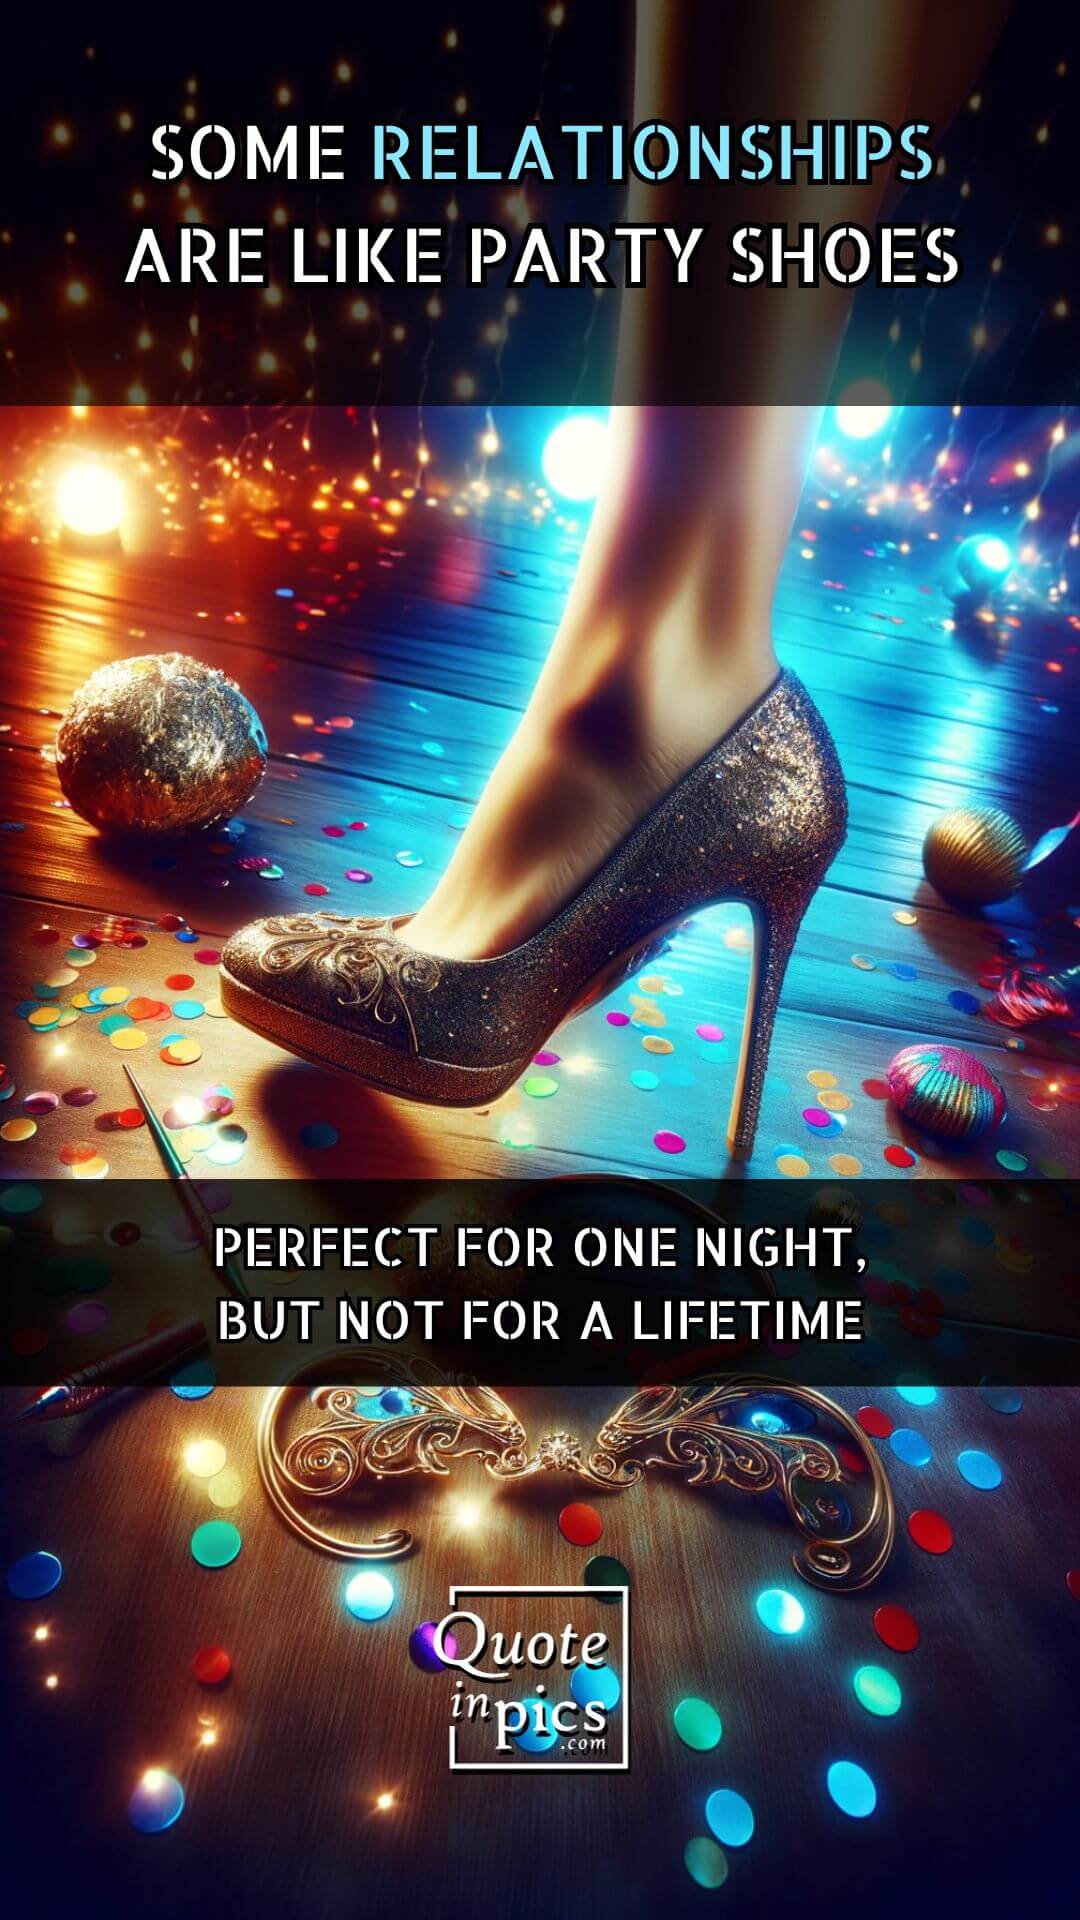 Some relationships are like party shoes perfect for one night, but not for a lifetime.